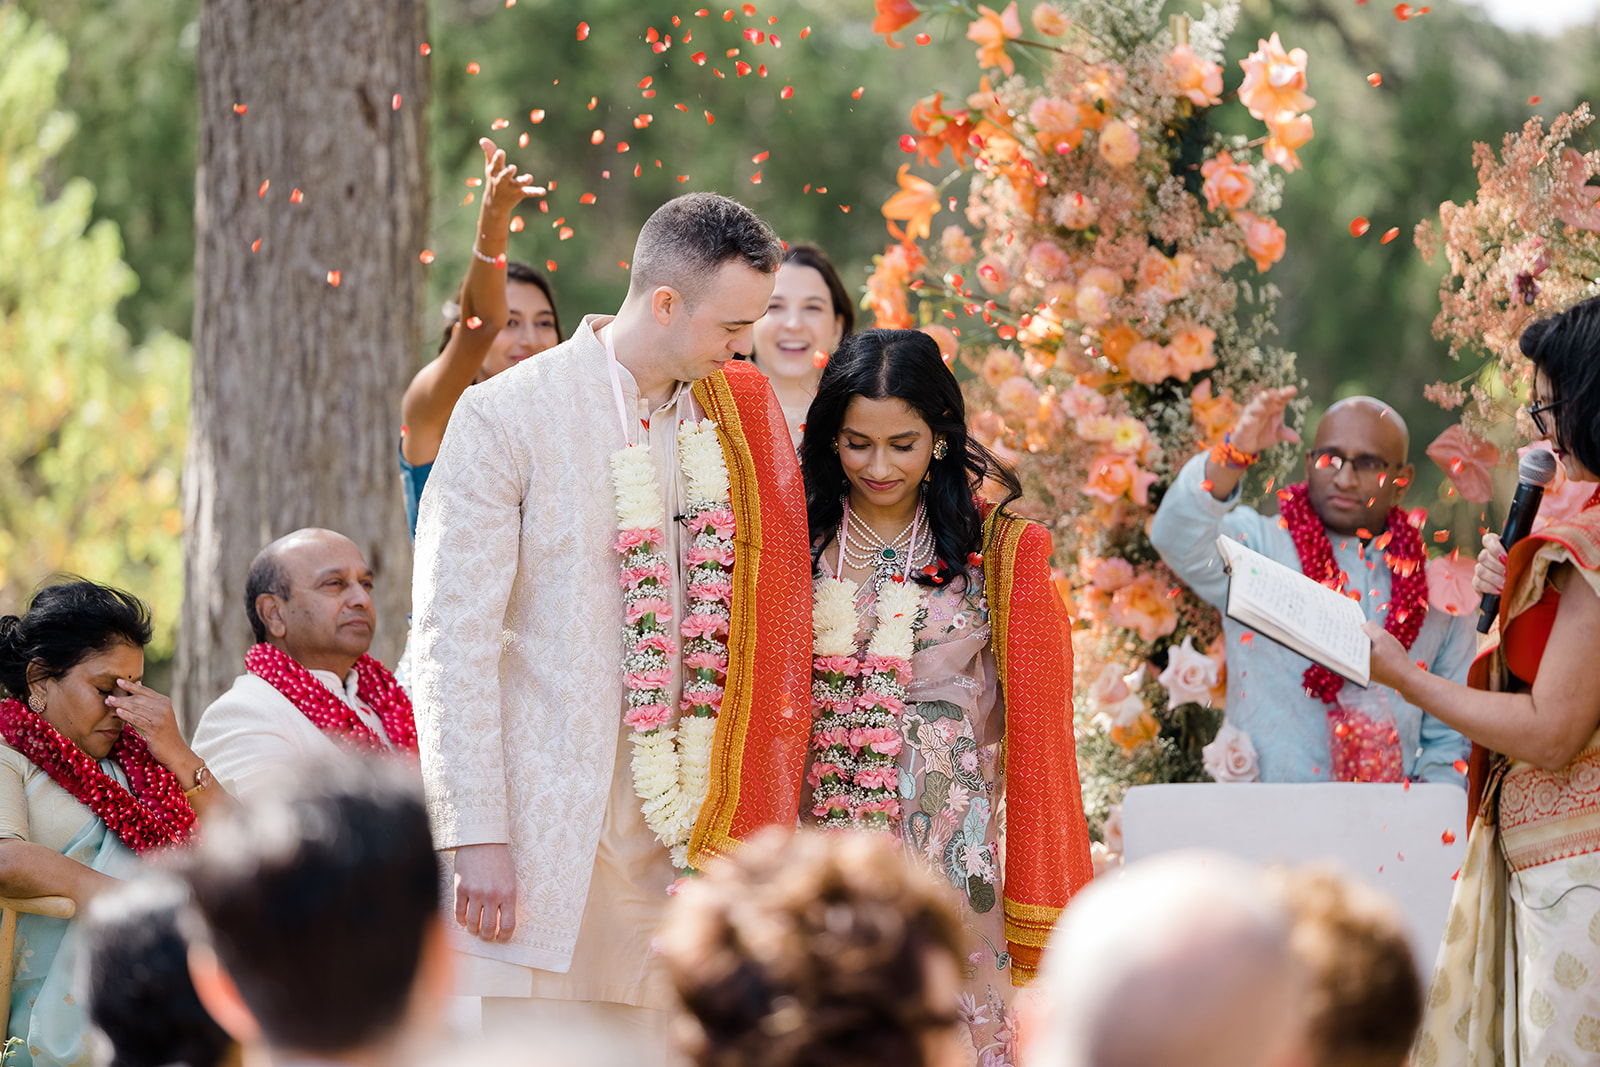 Lavish Indian Weddings Are Back and Bigger Than Ever - The New